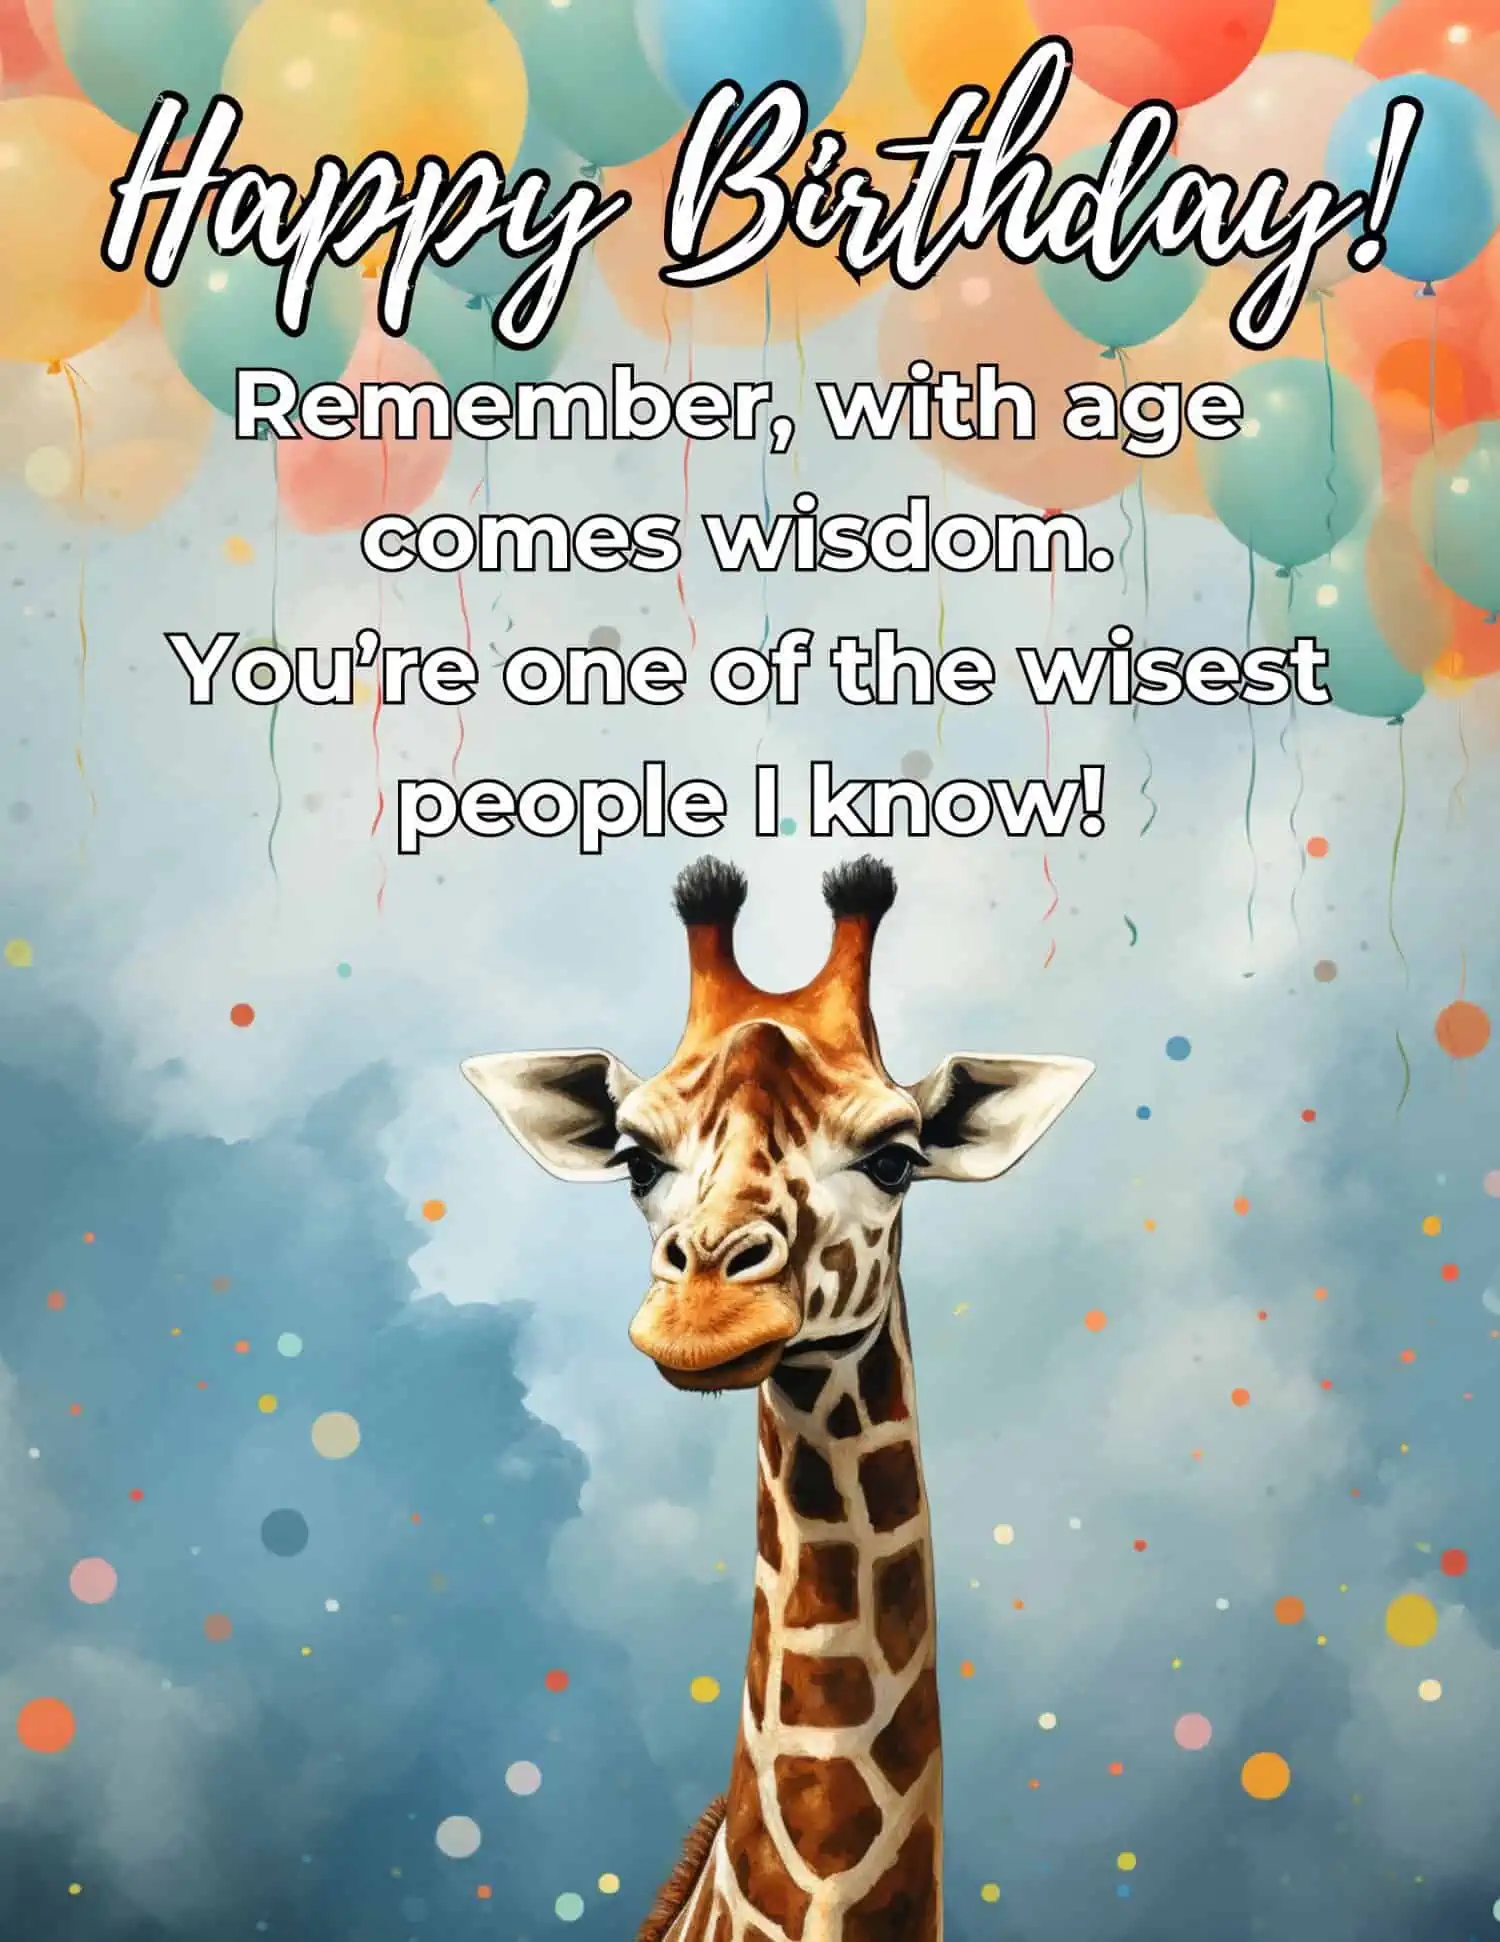 A delightful compilation of funny and heartwarming birthday wishes, perfect for sharing a laugh with your best friend on their special day.